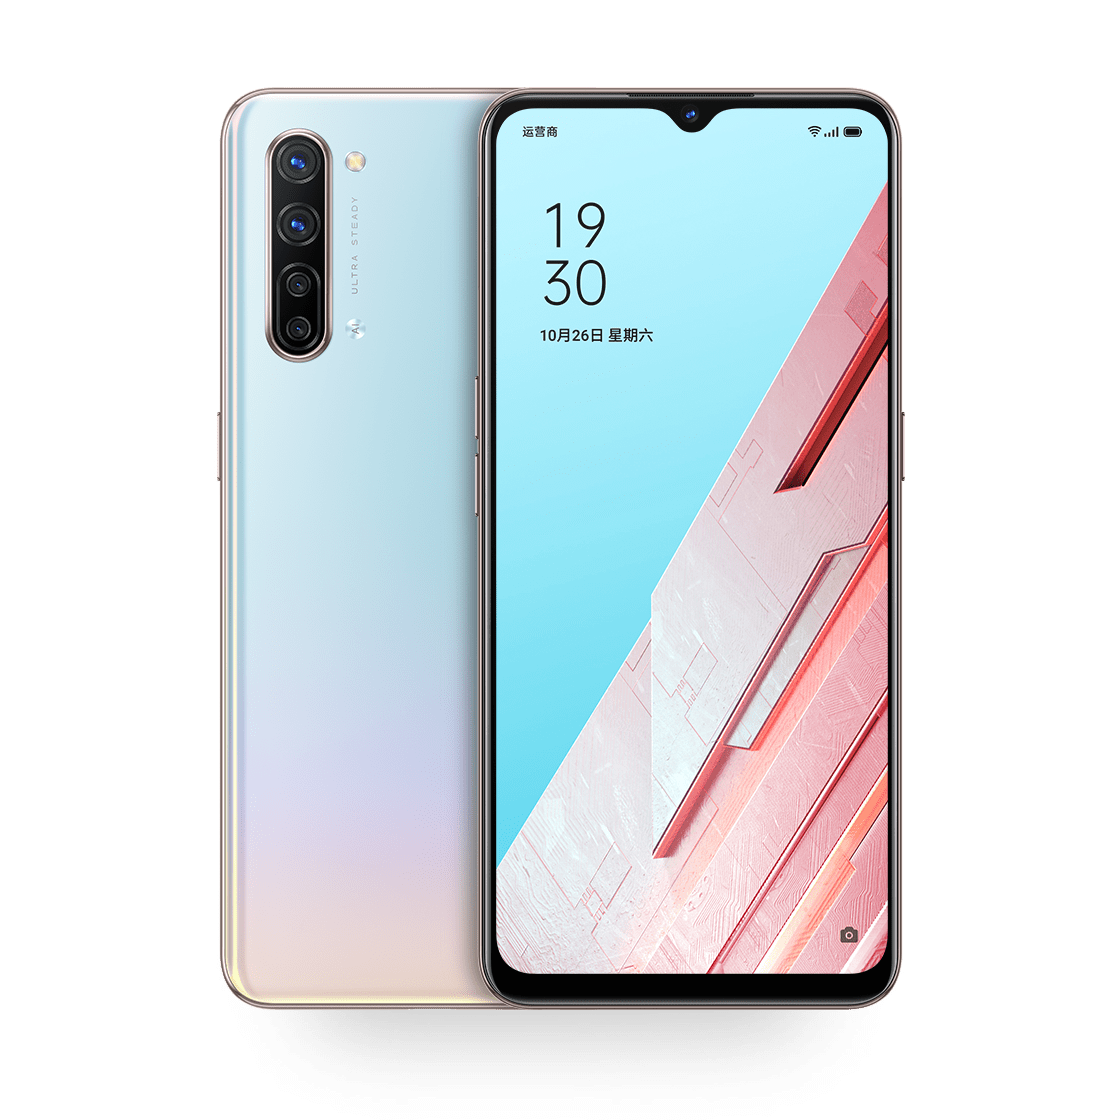 OPPO Reno3 Vitality Edition with SD765 now available for pre-order